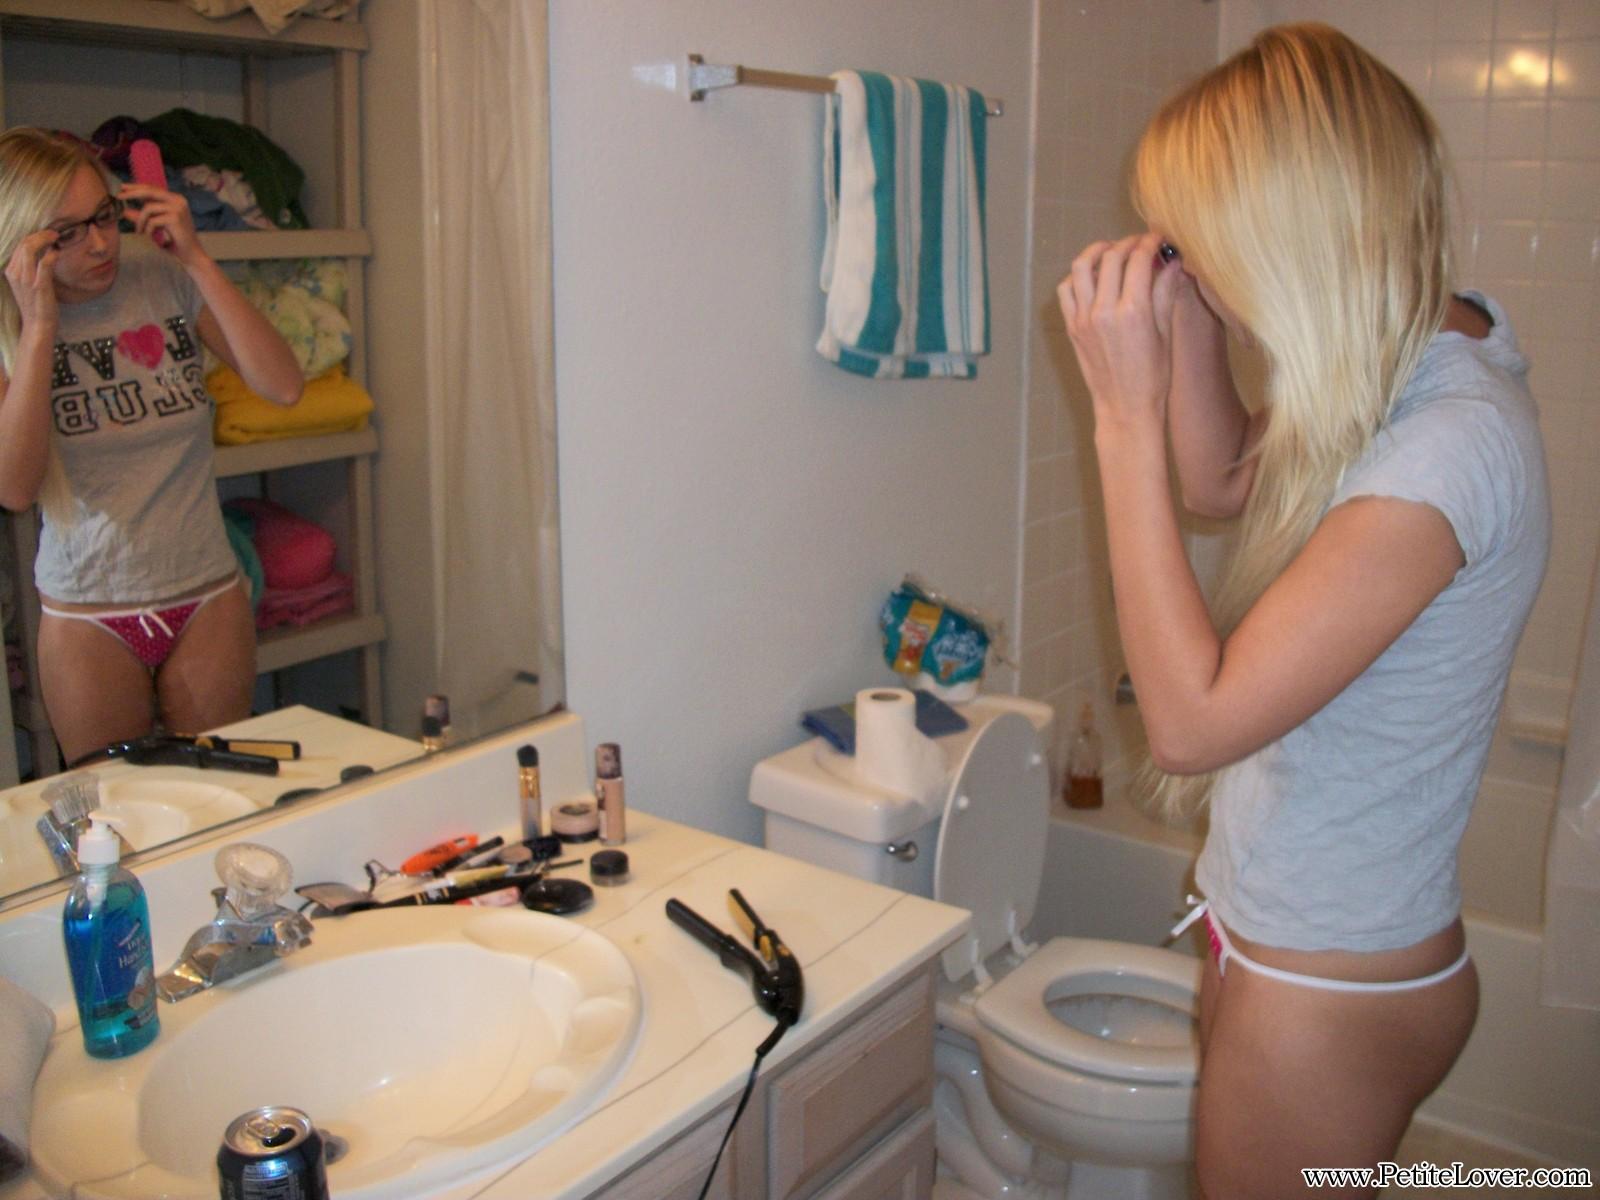 Petite blonde teen Elle invites you into the bathroom to watch her get ready #54158940